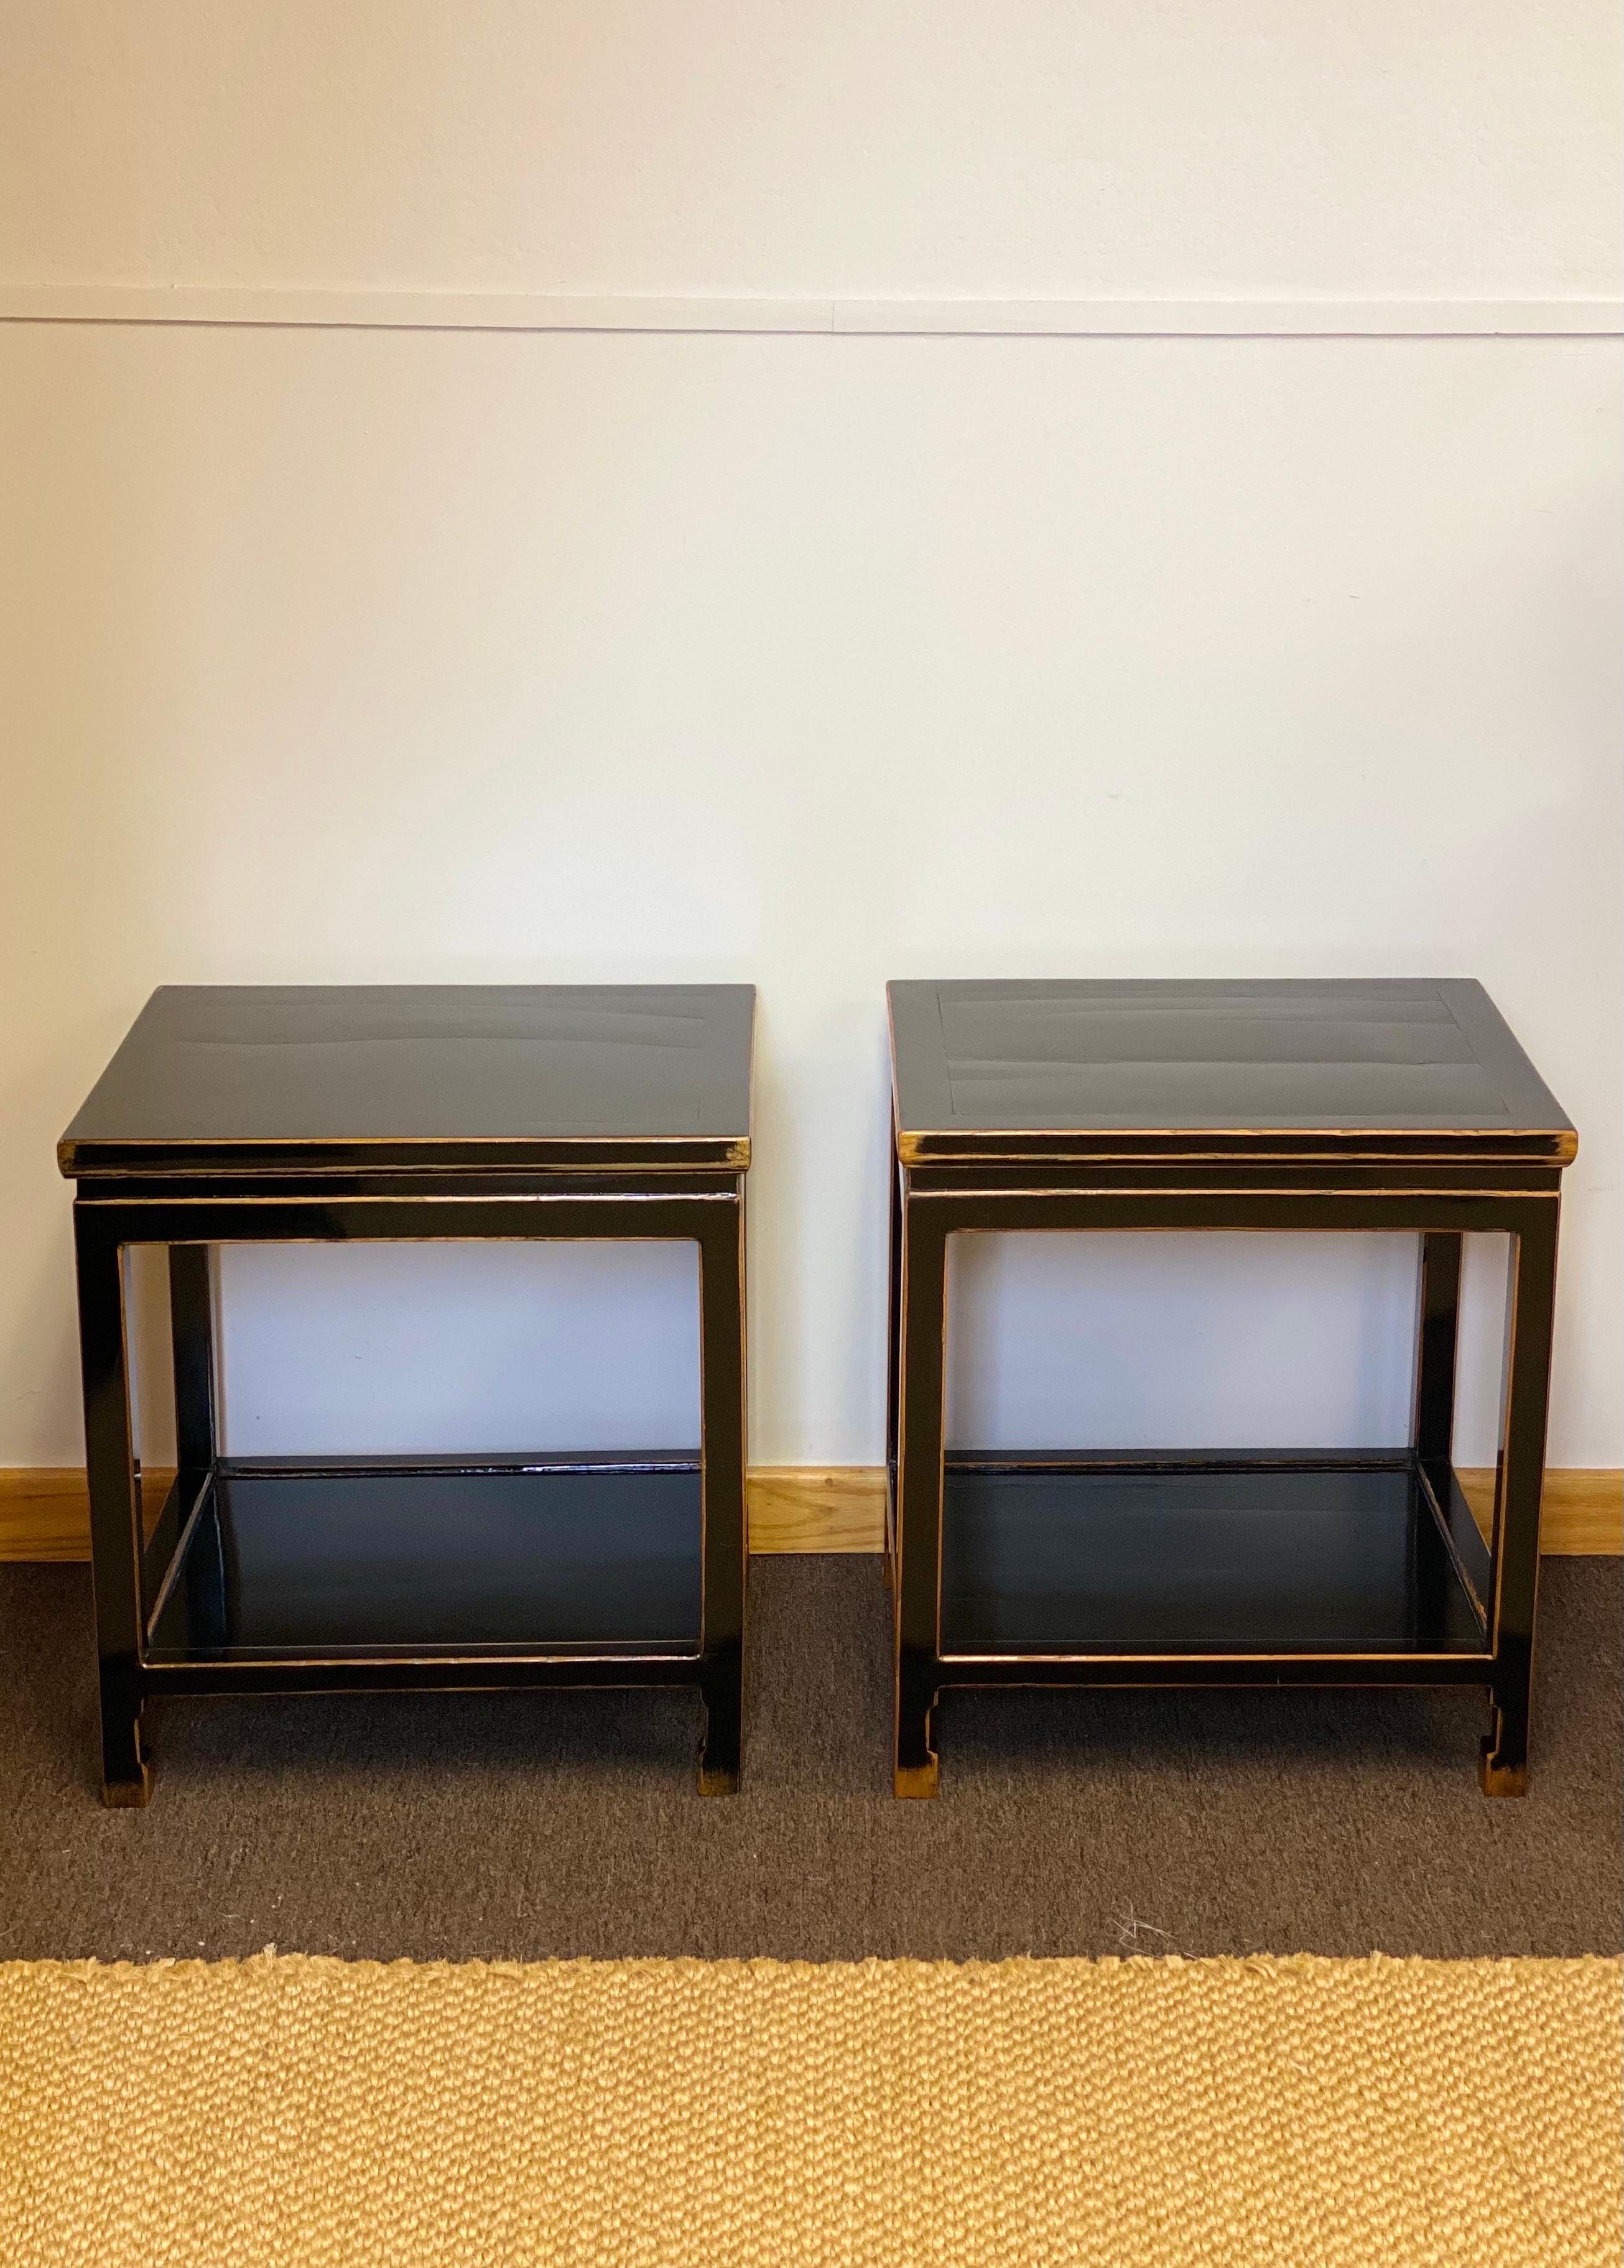 Chinese Export Late 19th Century Chinese Black Lacquer Rectangular Two-Tier Side Tables, Pair